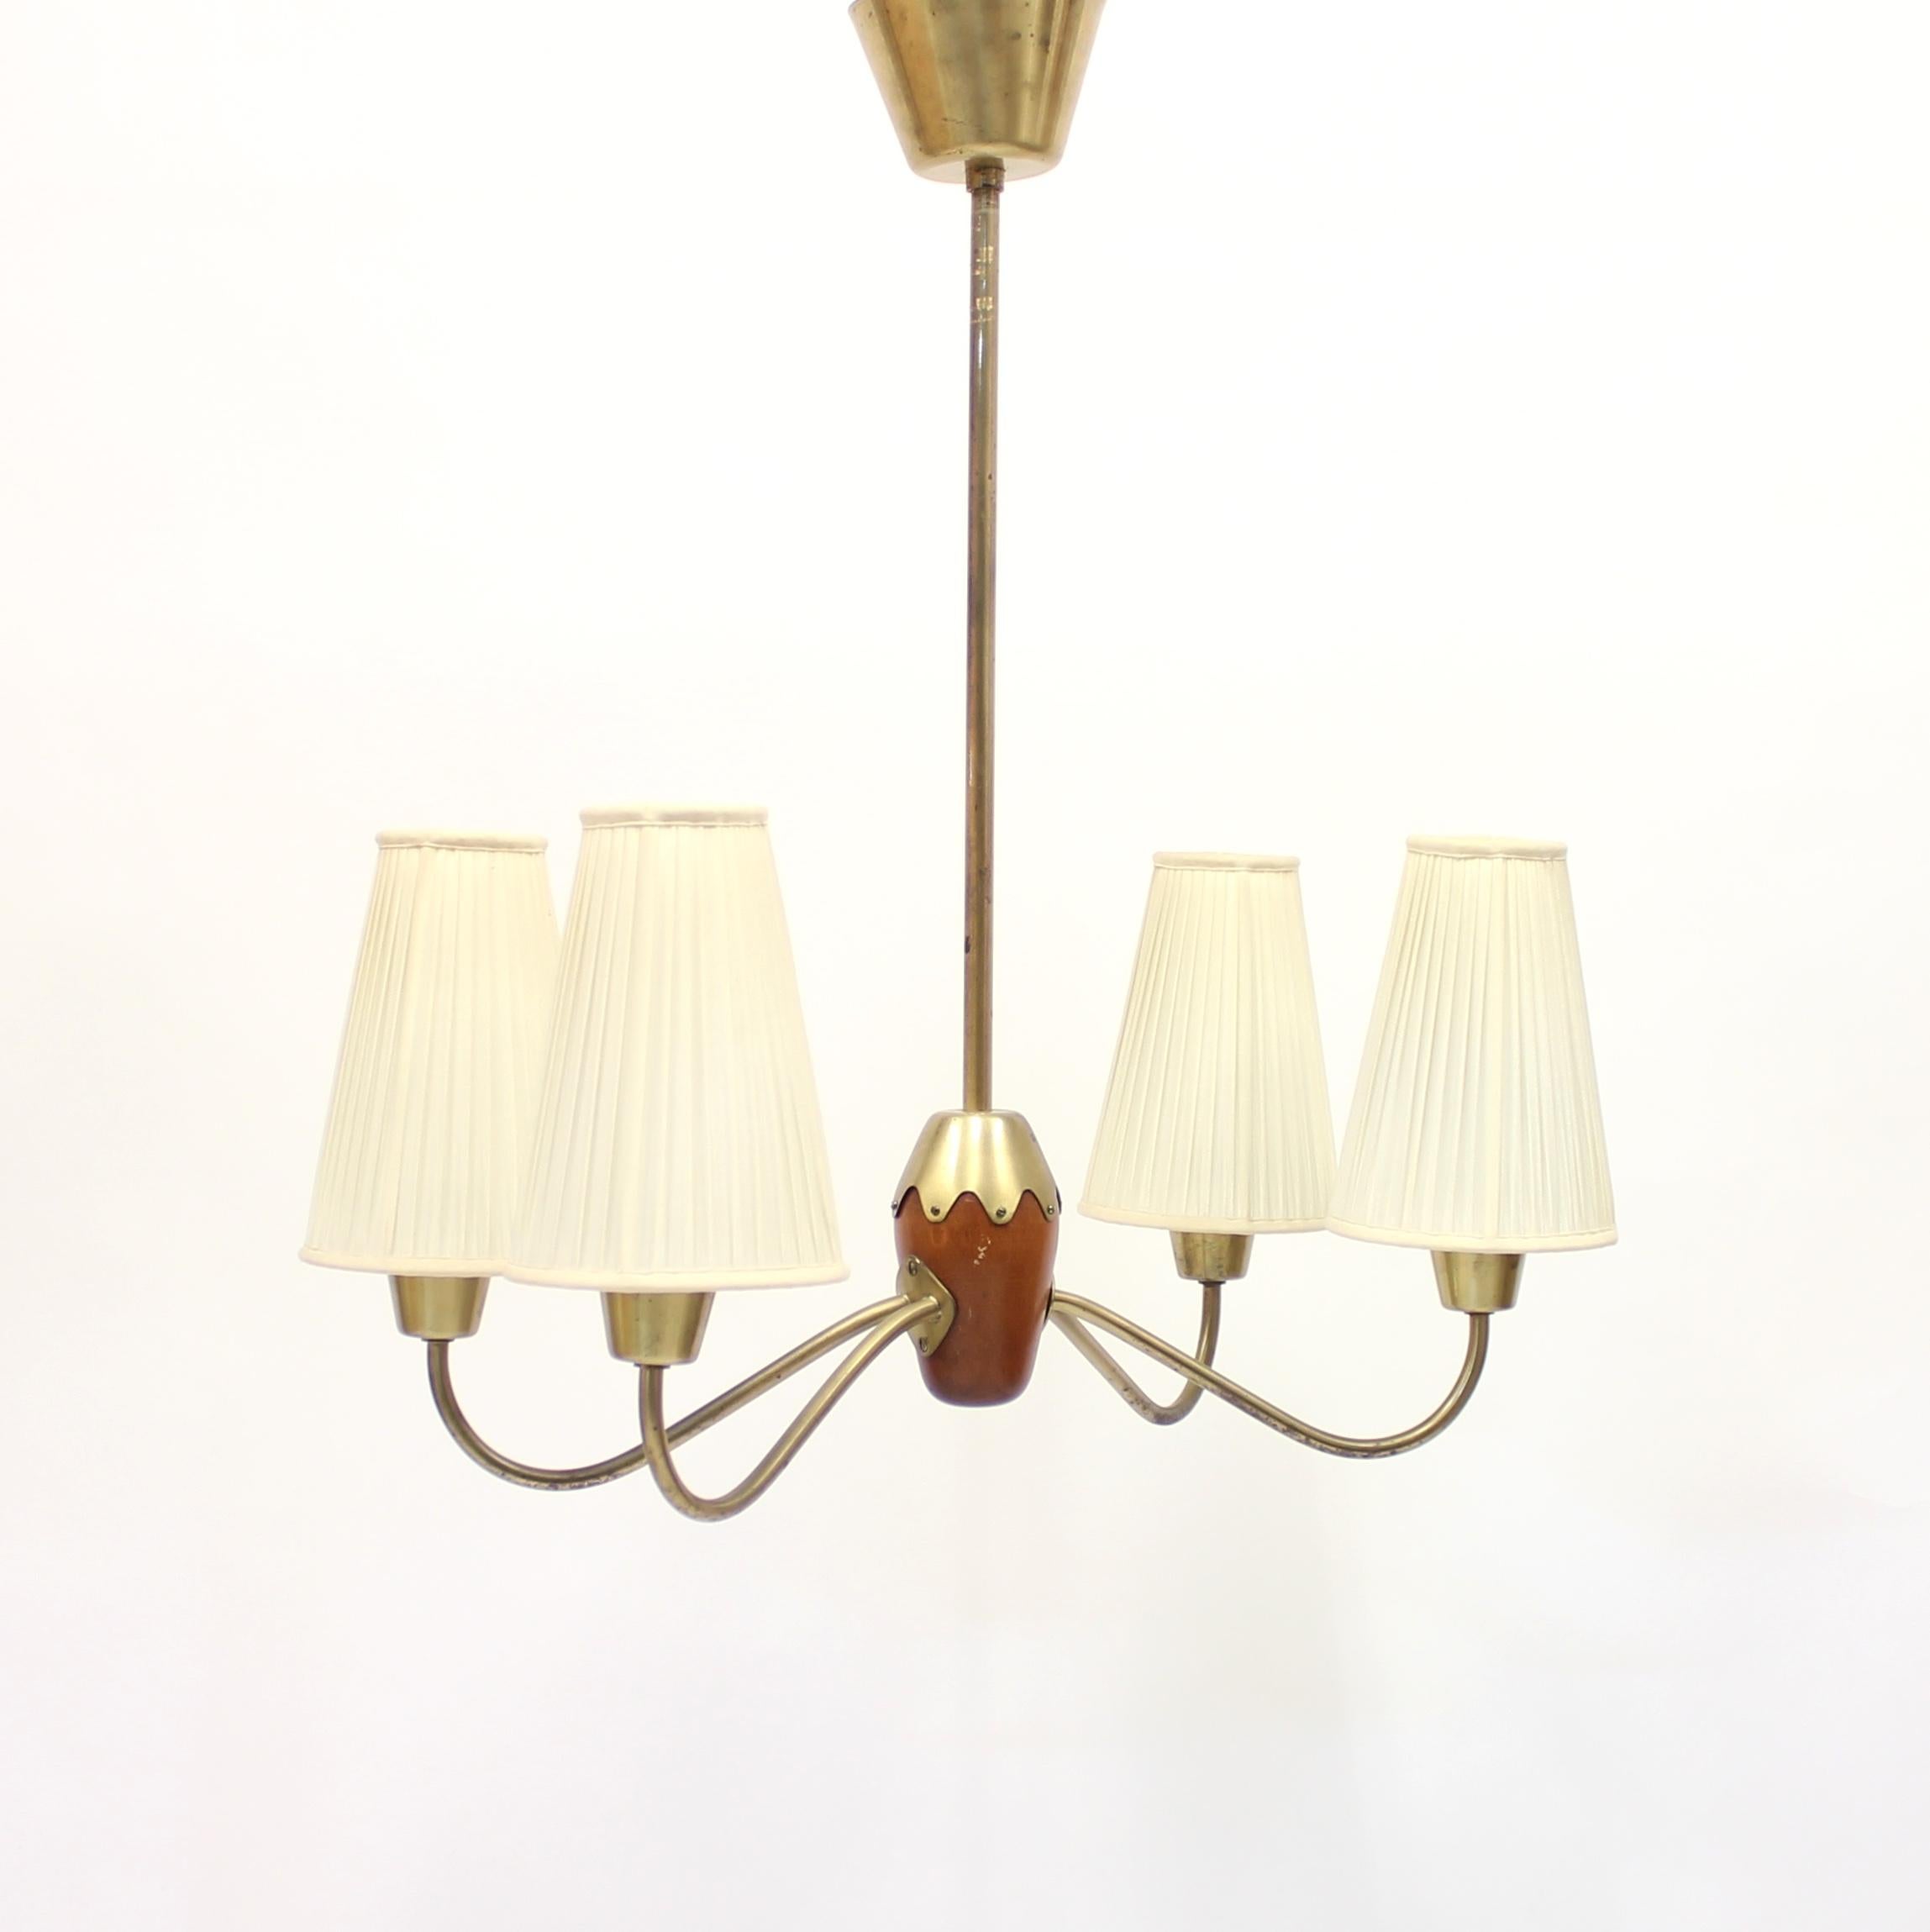 Very unusual brass ceiling lamp with 4 light sources mounted two on each side around a egg shaped mahogany ball with a brass top. 4 pleated shades in off white that most likely are original. Possibly made by ASEA or Ateljé Lyktan. New wiring. Good